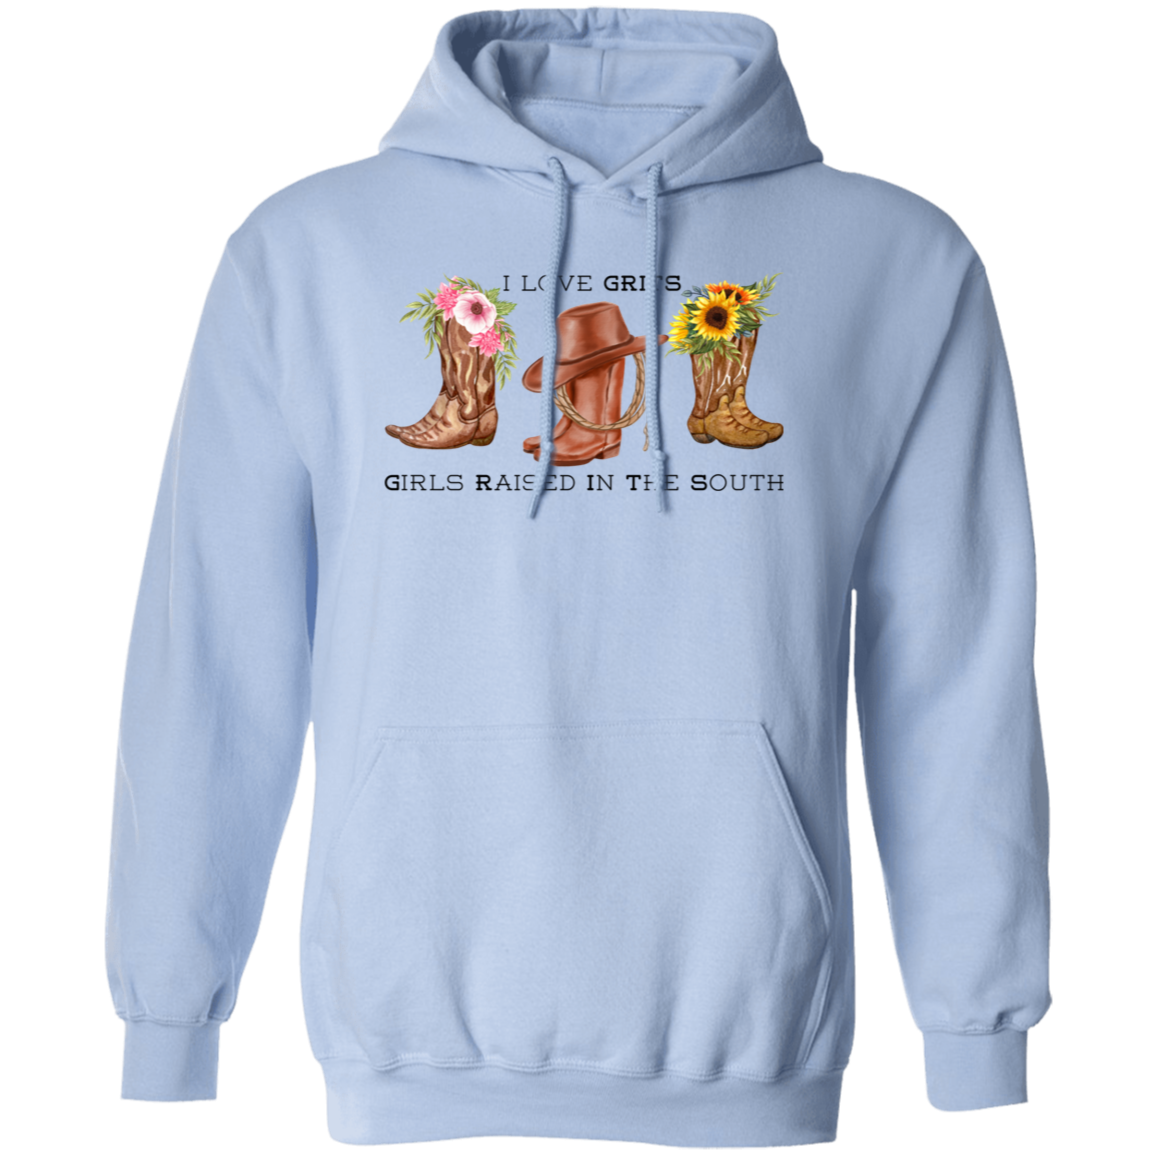 Girl Raised In The South (G.R.I.T.S.) Hoodie